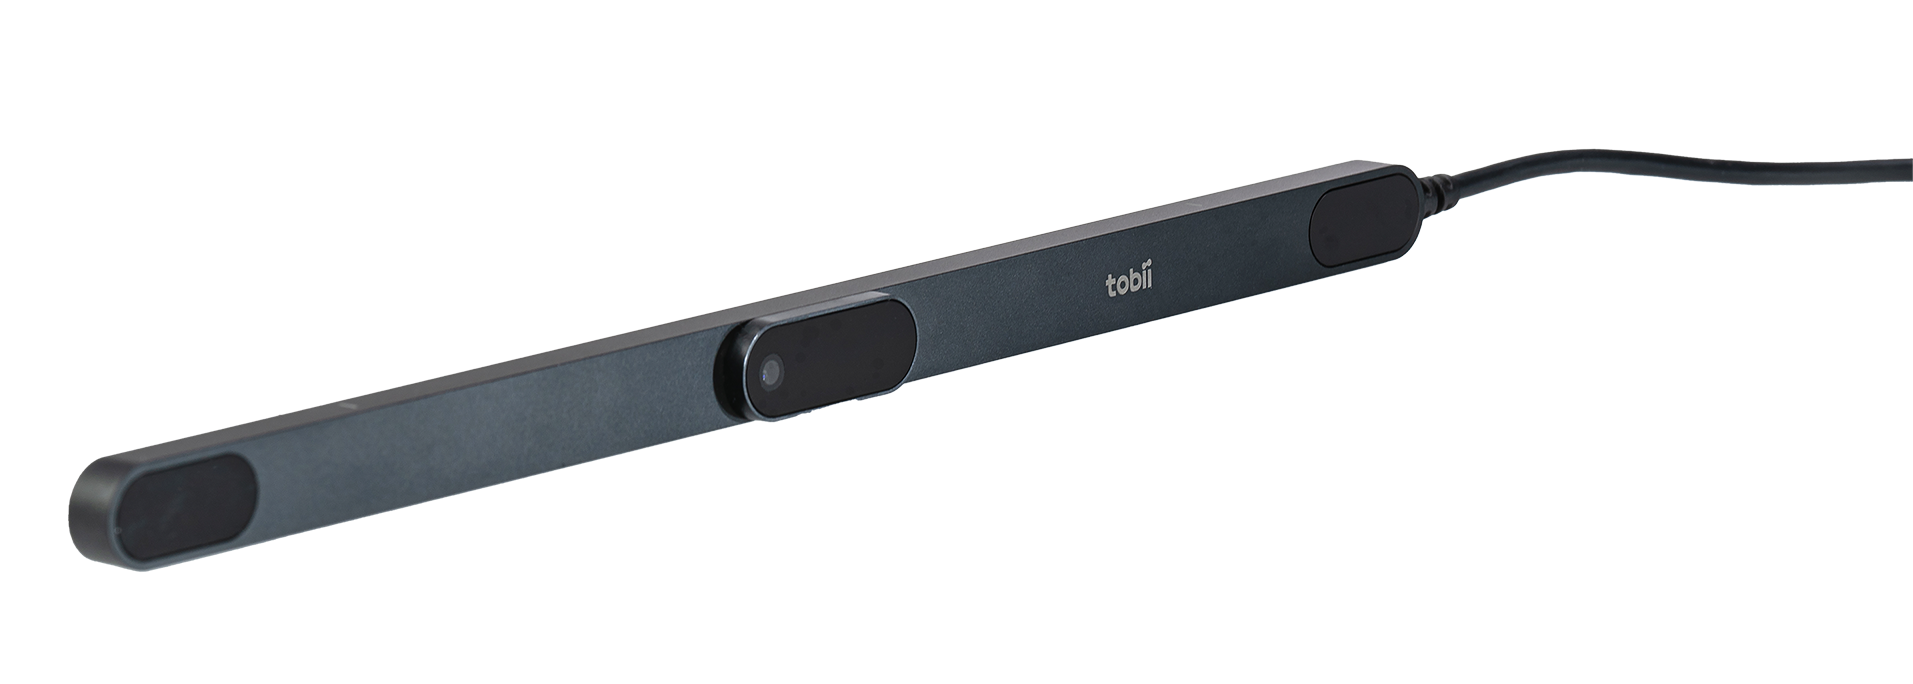 SOMA gets Tobii eye-tracking support, just in case it wasn't